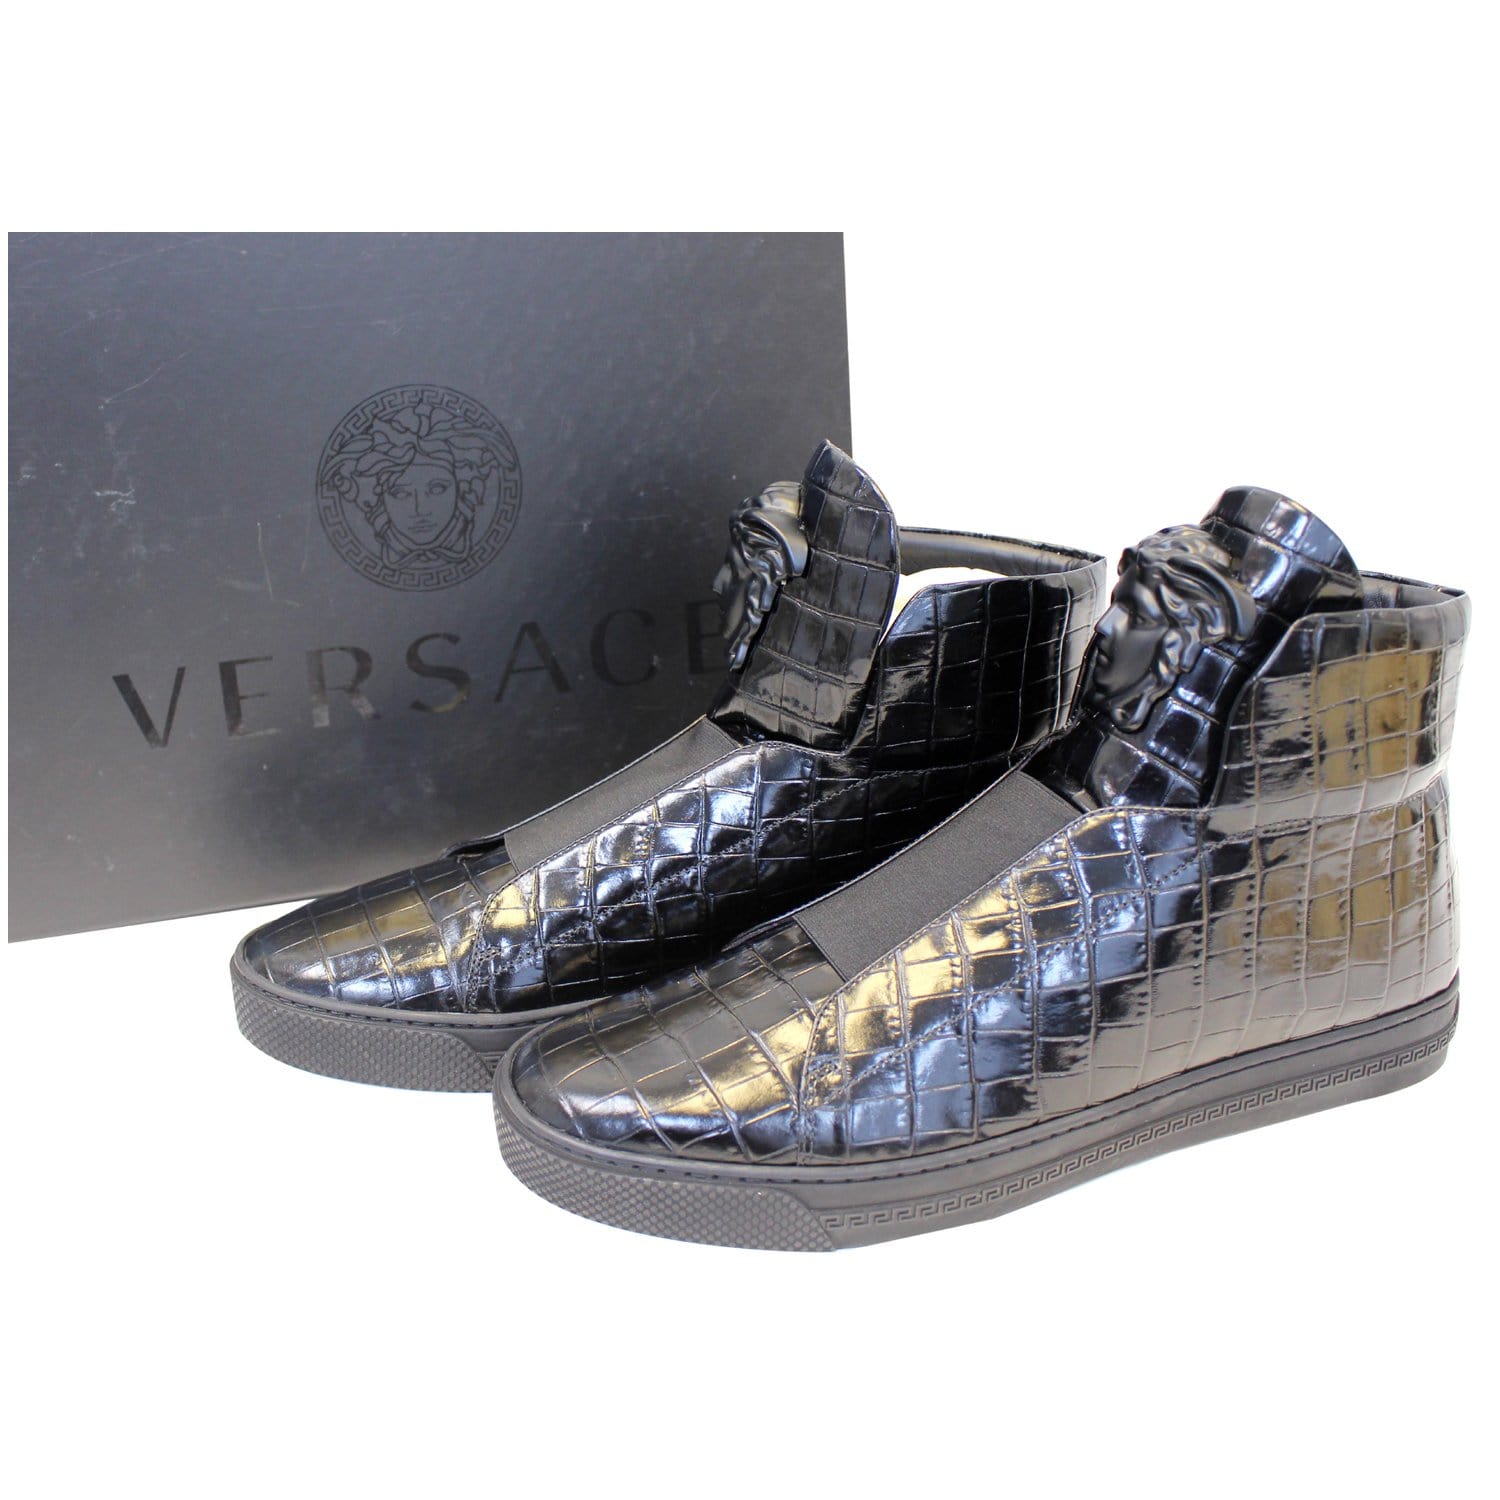 Versace Black Leather Medusa Lace High Top Sneakers Size 42.5